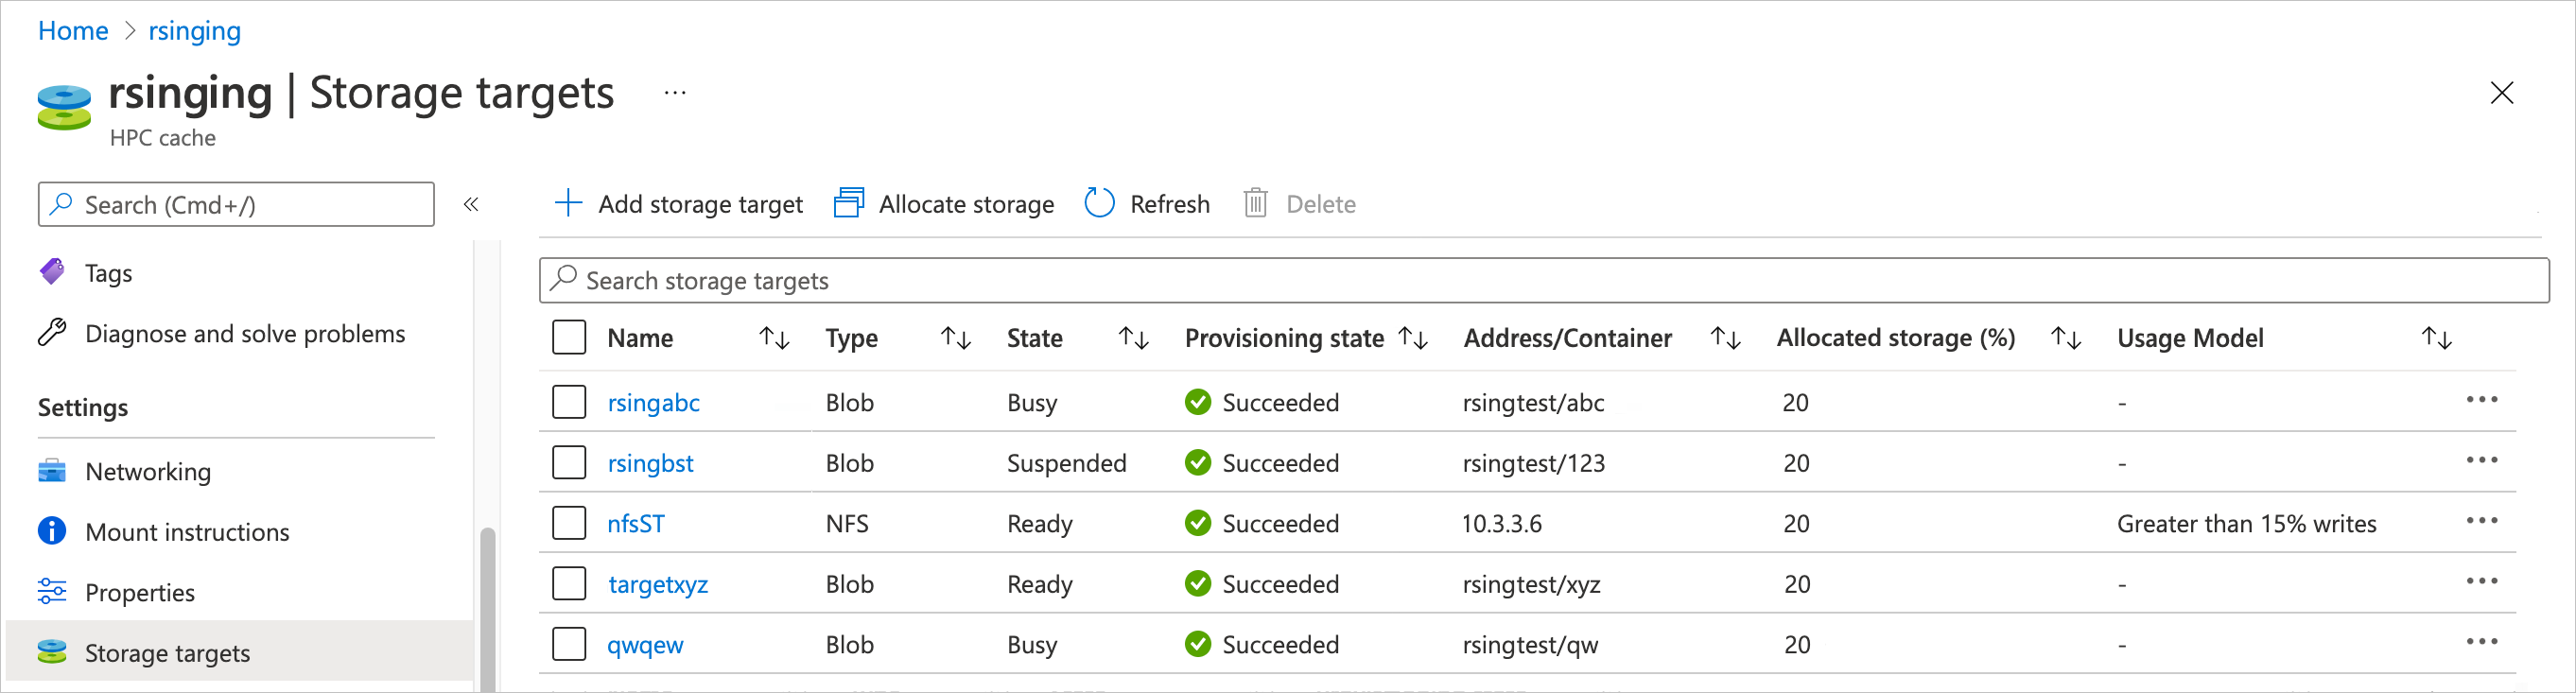 Screenshot of the Settings > Storage targets page in the Azure portal. There are multiple storage targets in the list, and column headings show Name, Type, State, Provisioning state, Address/Container, and Usage model for each one.